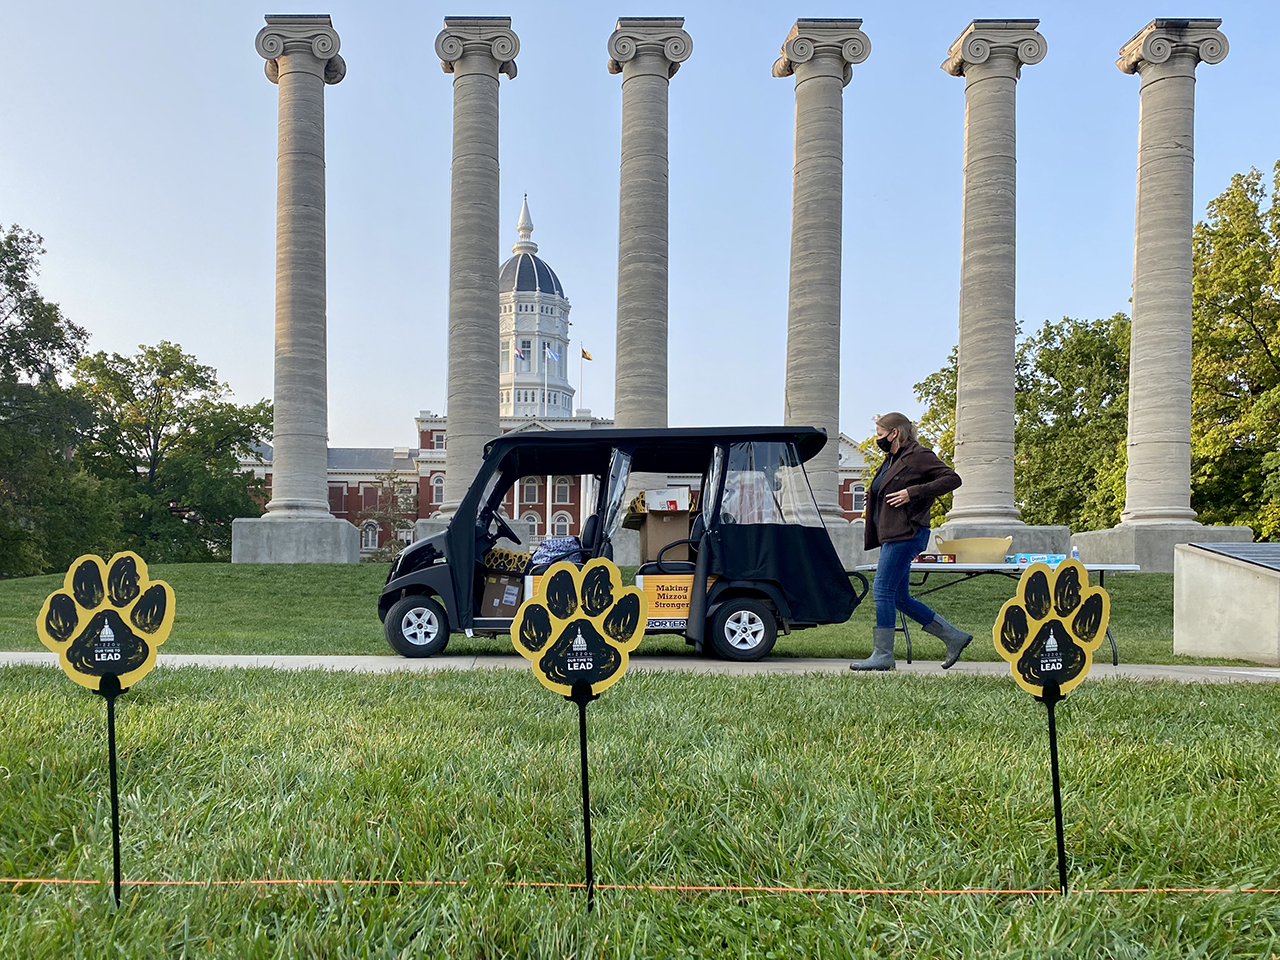 a woman walks in front of a golf cart with the columns in the background and paws on sticks in the foreground